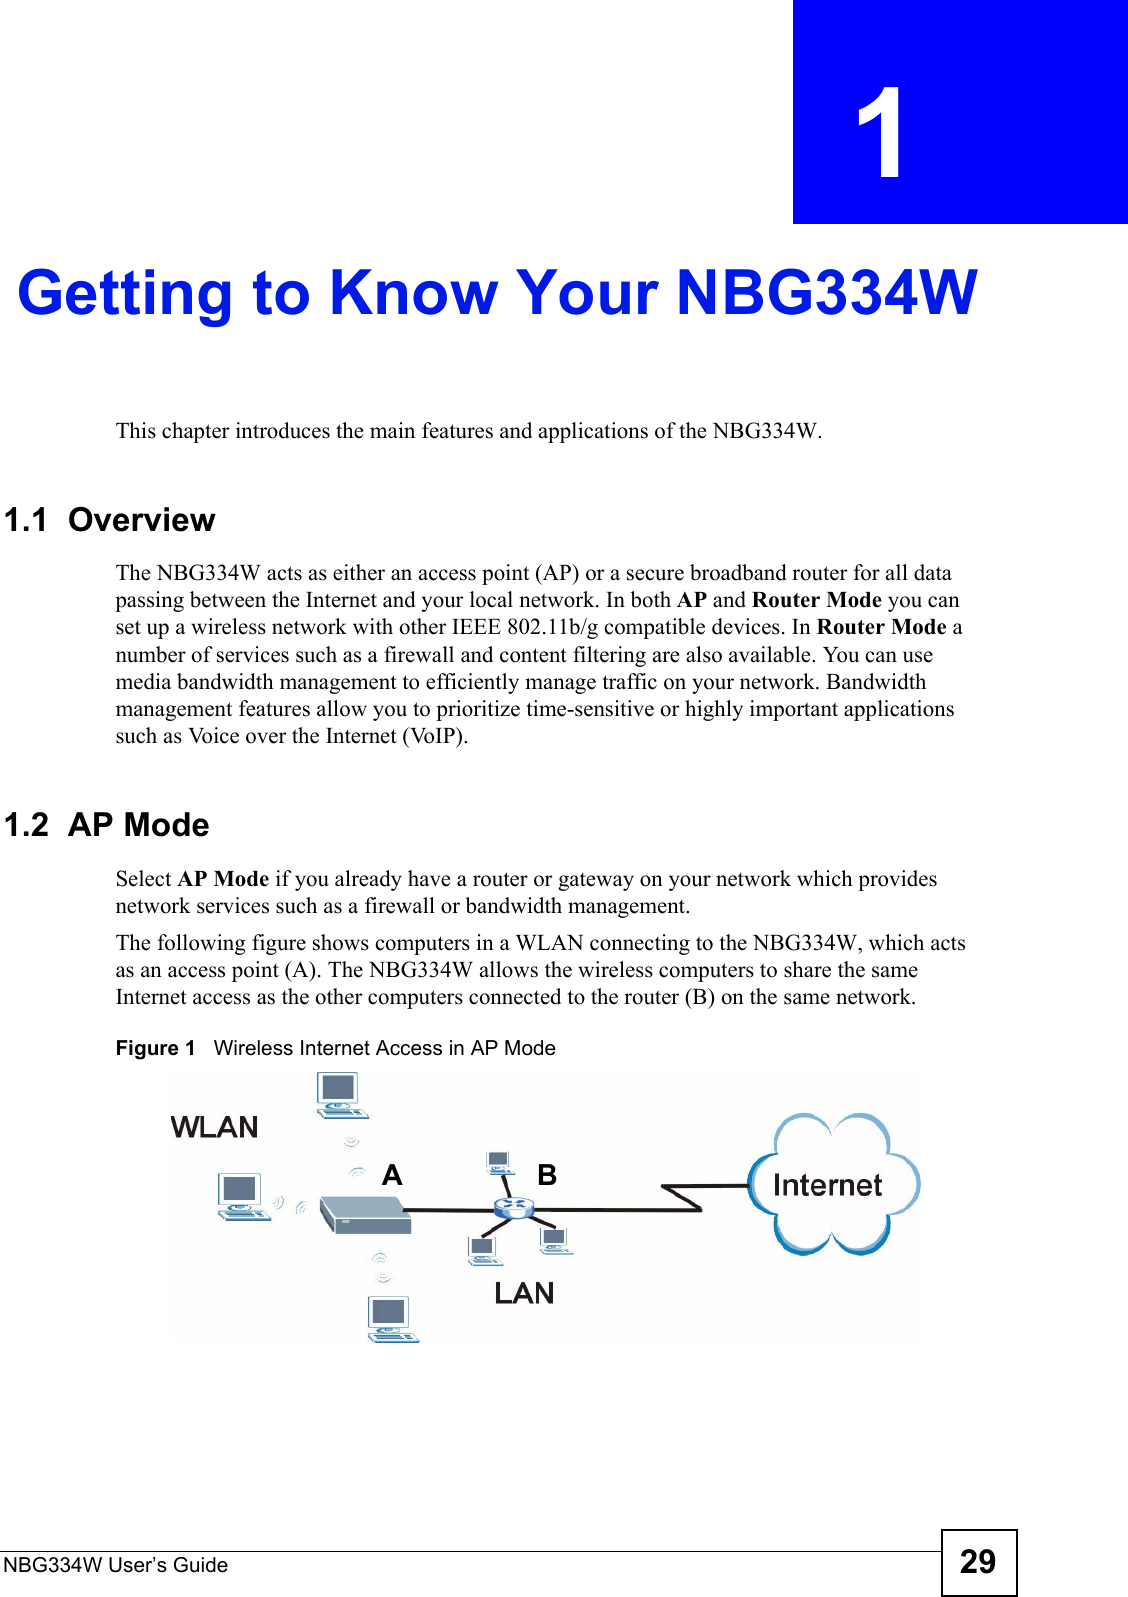 NBG334W User’s Guide 29CHAPTER  1 Getting to Know Your NBG334WThis chapter introduces the main features and applications of the NBG334W.1.1  OverviewThe NBG334W acts as either an access point (AP) or a secure broadband router for all data passing between the Internet and your local network. In both AP and Router Mode you can set up a wireless network with other IEEE 802.11b/g compatible devices. In Router Mode a number of services such as a firewall and content filtering are also available. You can use media bandwidth management to efficiently manage traffic on your network. Bandwidth management features allow you to prioritize time-sensitive or highly important applications such as Voice over the Internet (VoIP).1.2  AP ModeSelect AP Mode if you already have a router or gateway on your network which provides network services such as a firewall or bandwidth management. The following figure shows computers in a WLAN connecting to the NBG334W, which acts as an access point (A). The NBG334W allows the wireless computers to share the same Internet access as the other computers connected to the router (B) on the same network.Figure 1   Wireless Internet Access in AP Mode AB